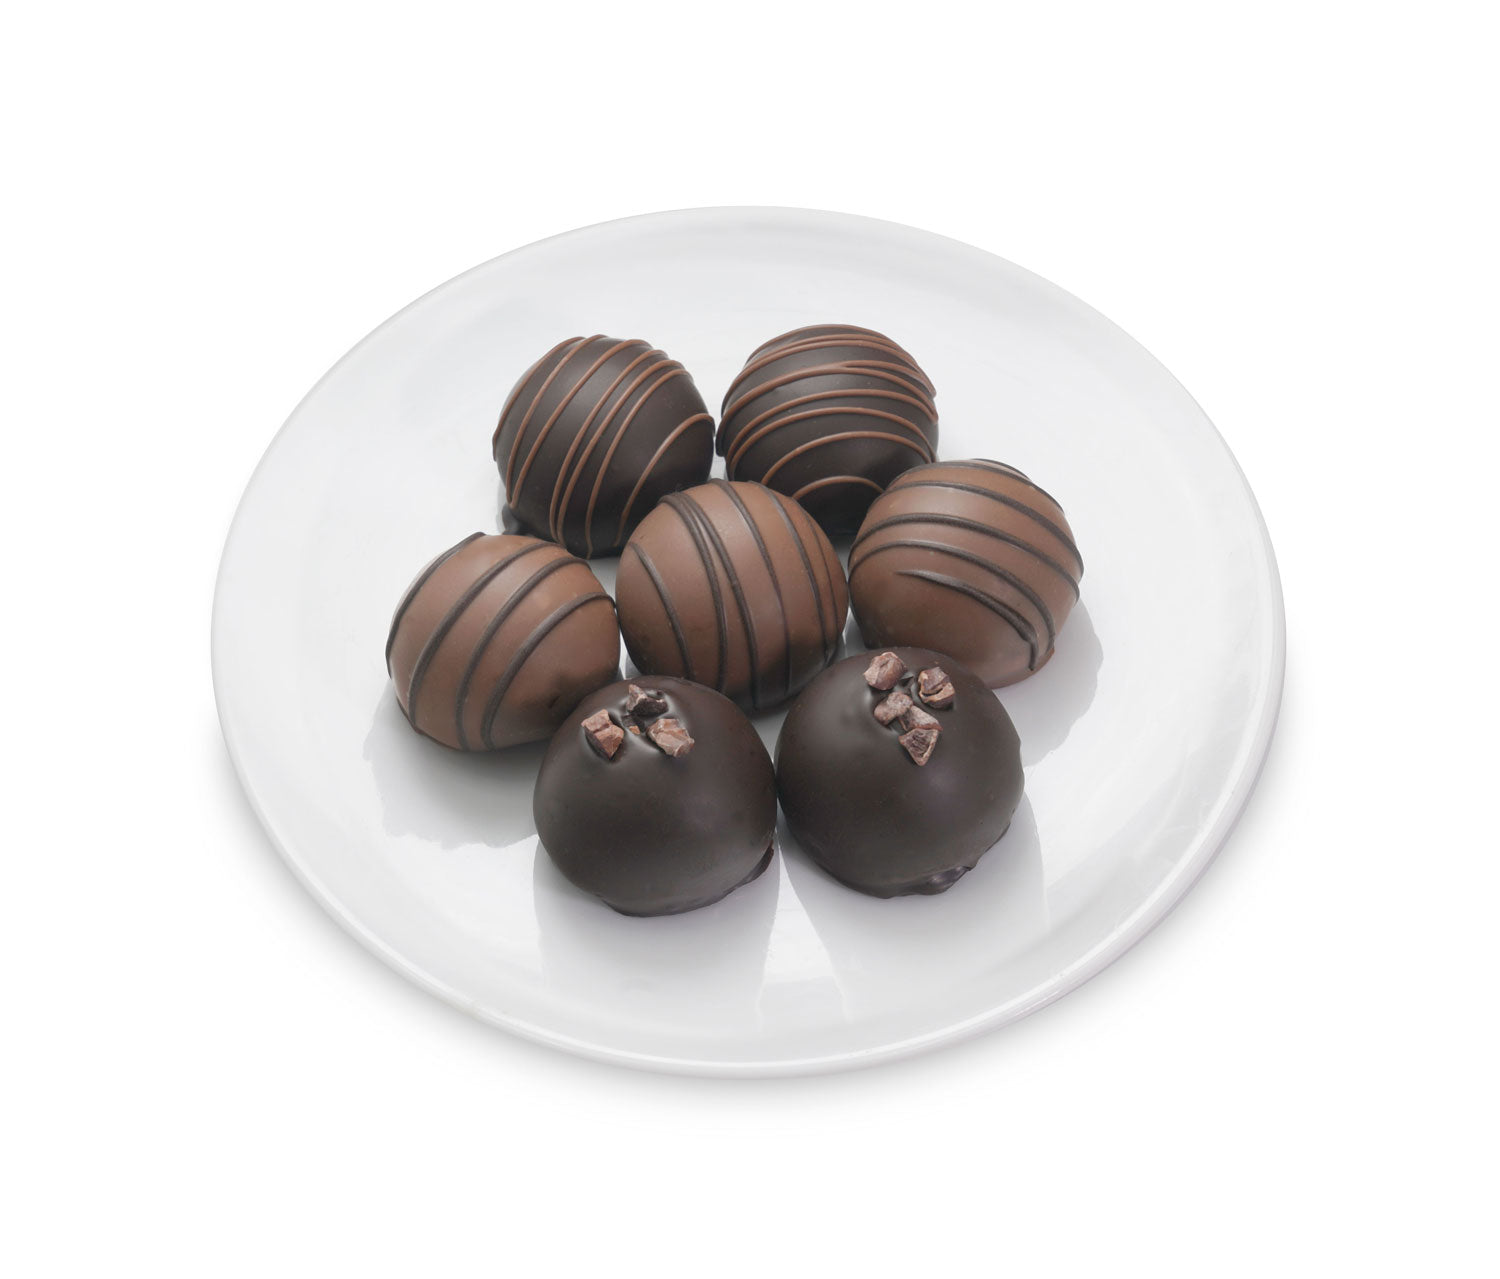 Cocoa Nibs and Peanut Butter Truffles